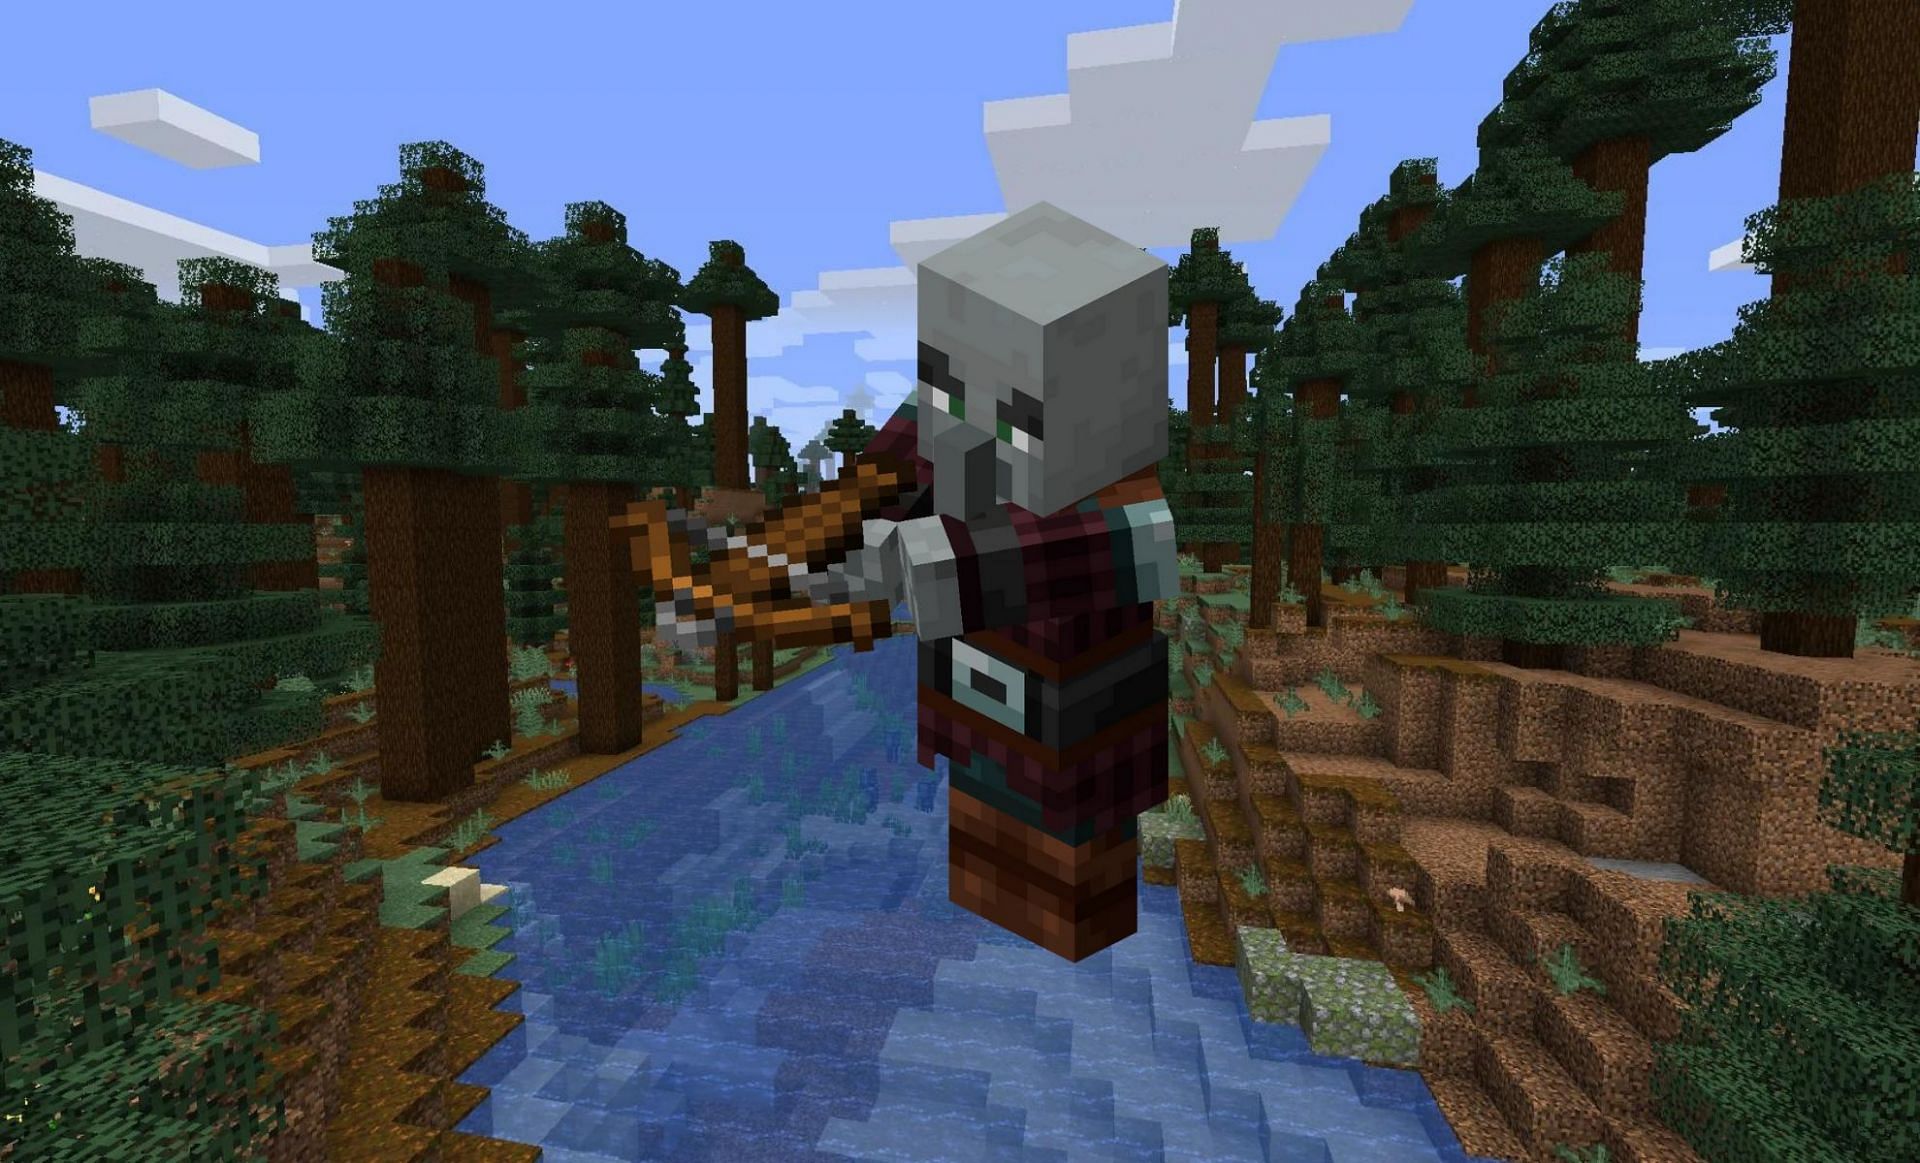 Minecraft Pillagers can be dangerous (Images via Minecraft Wiki)